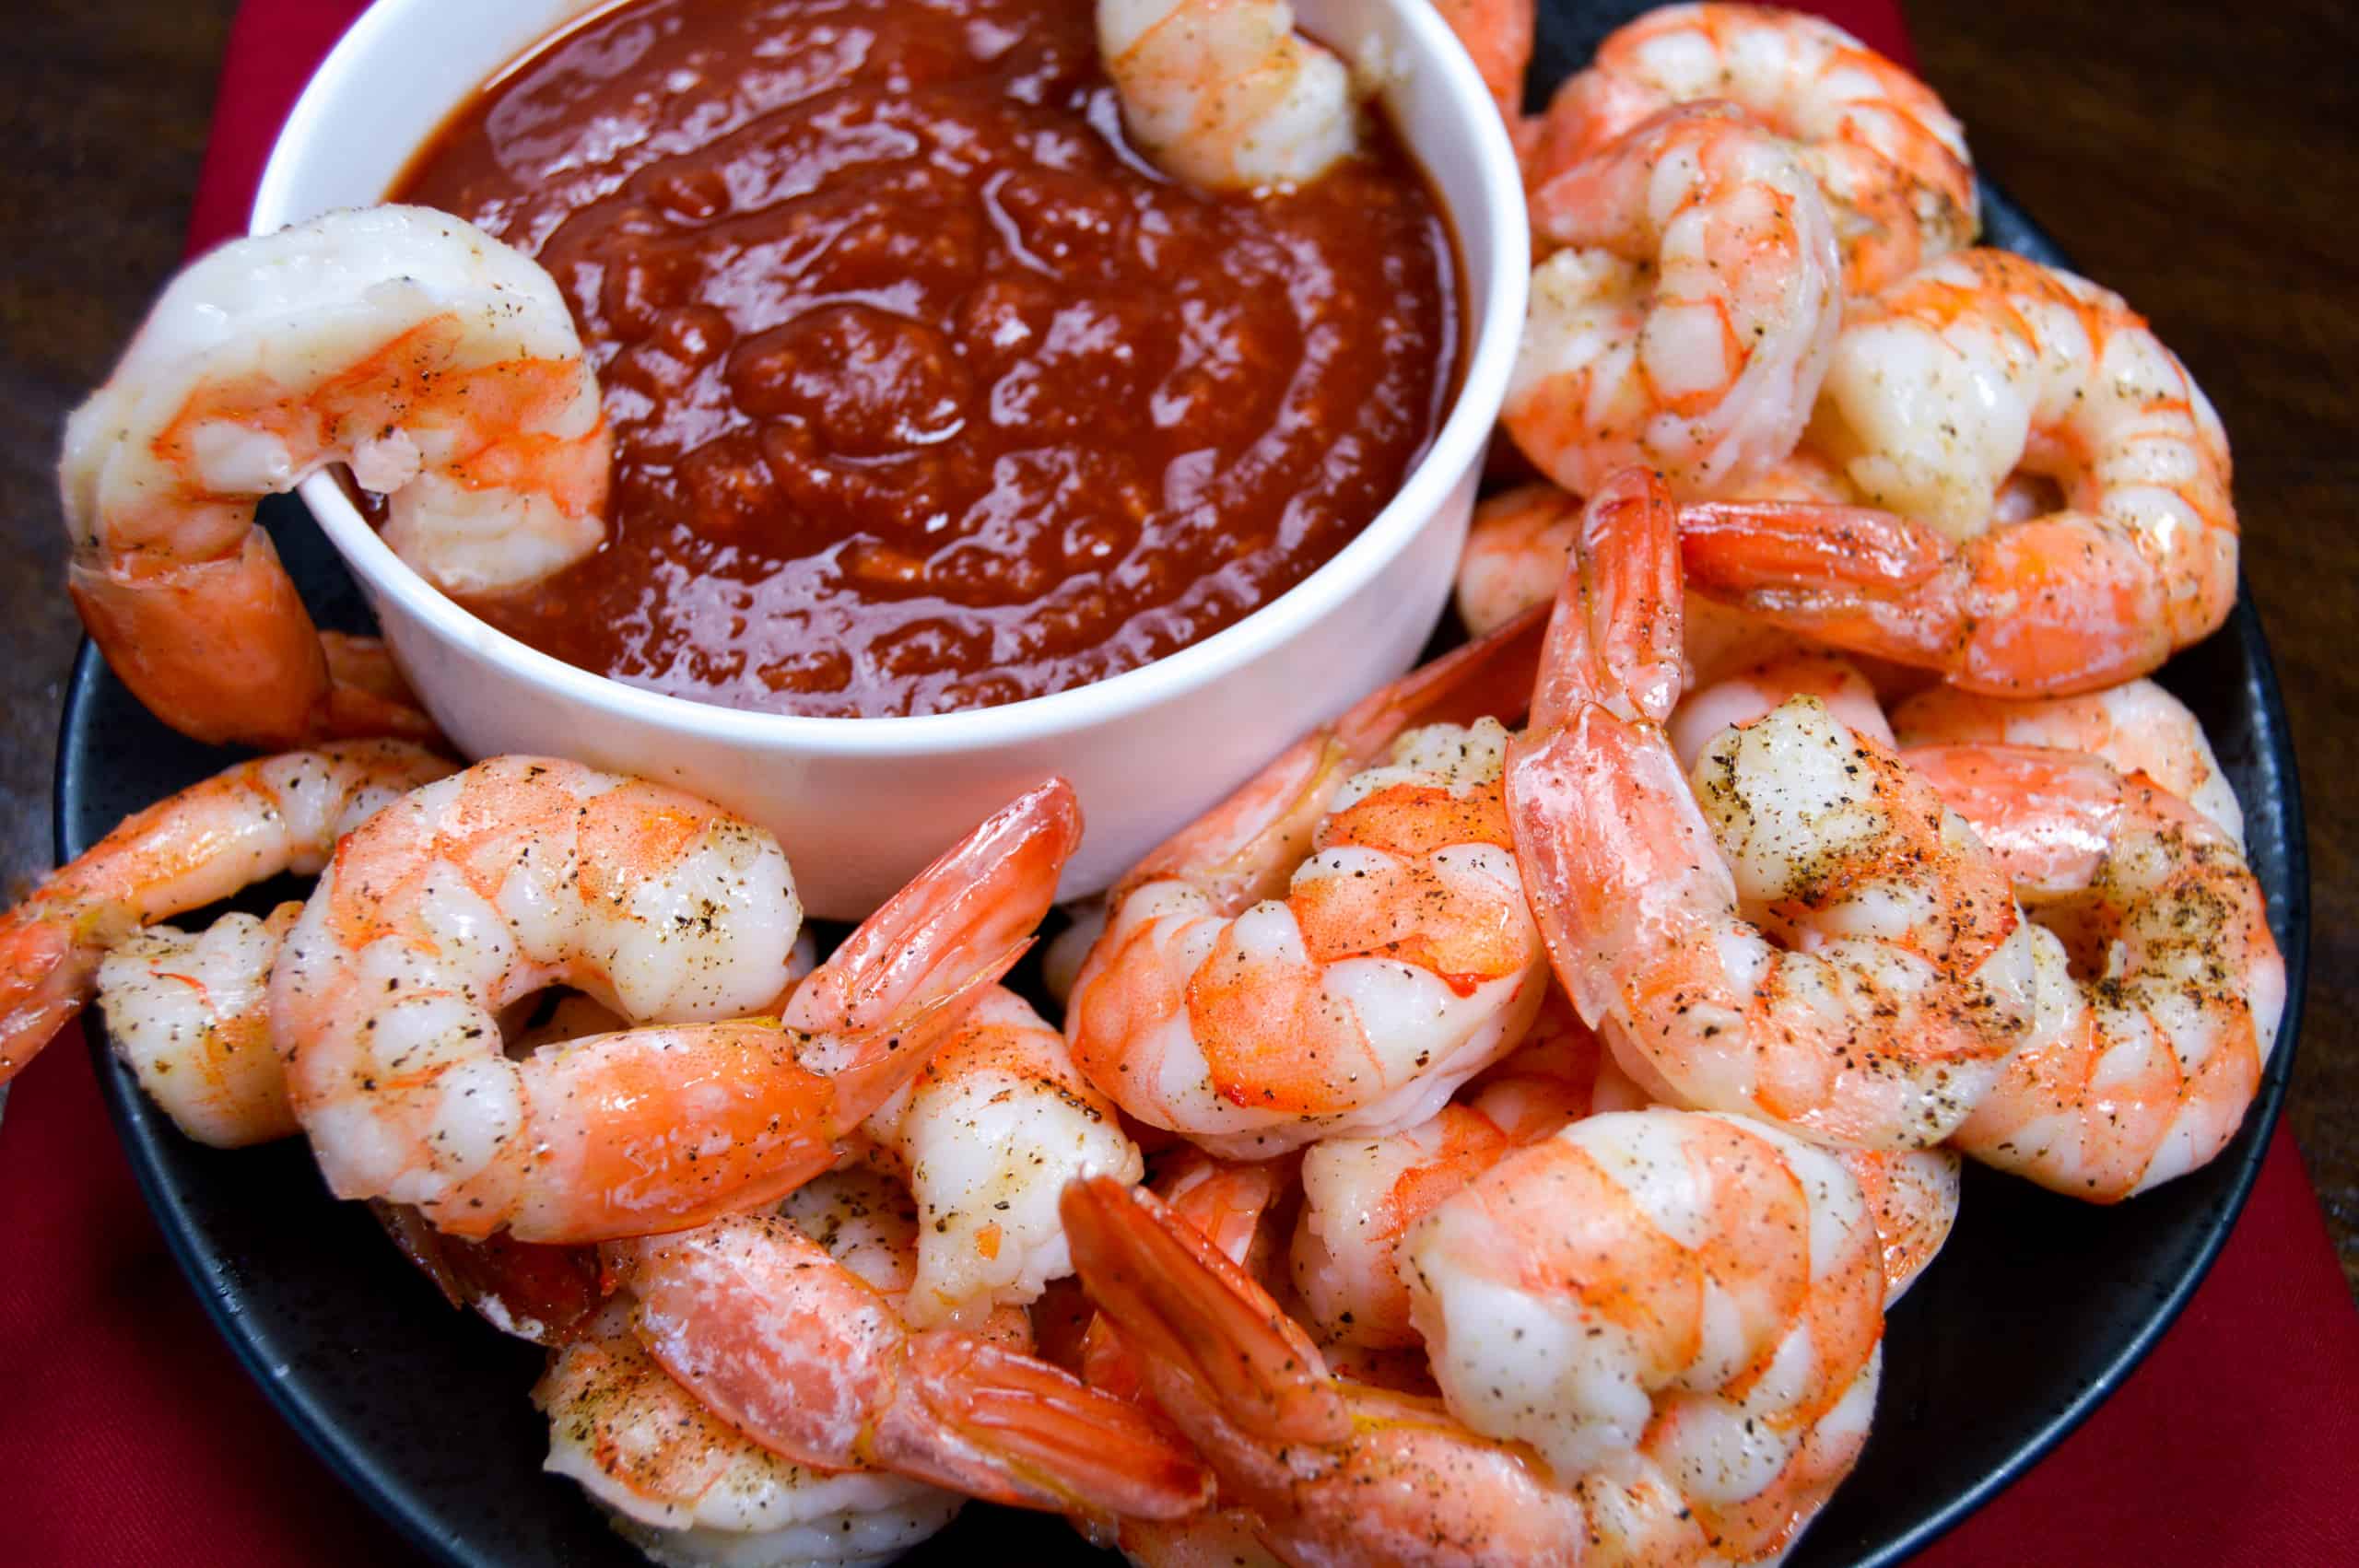 Big plate of roasted shrimp and cocktail sauce of shrimp cocktail